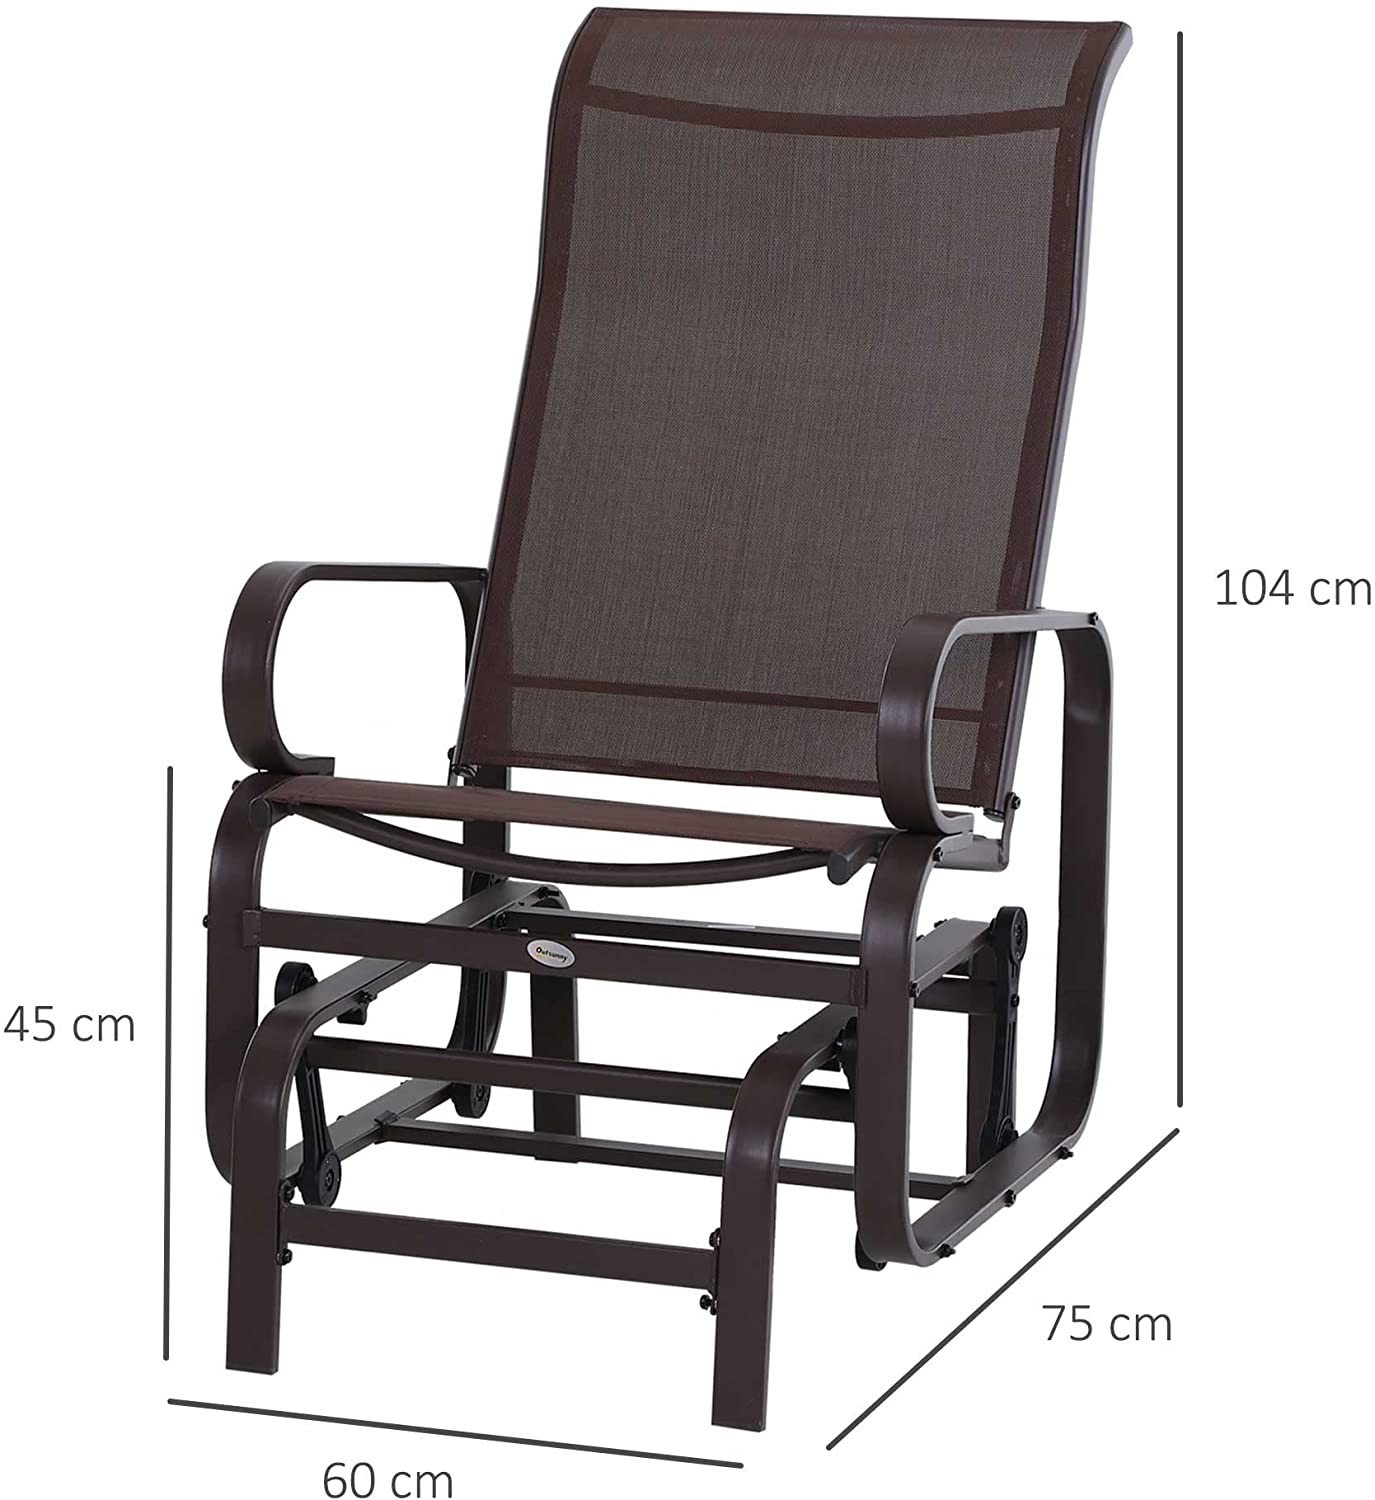 Outsunny Outdoor Gliding Rocking Chair w/ Steel Frame for Patio, Garden